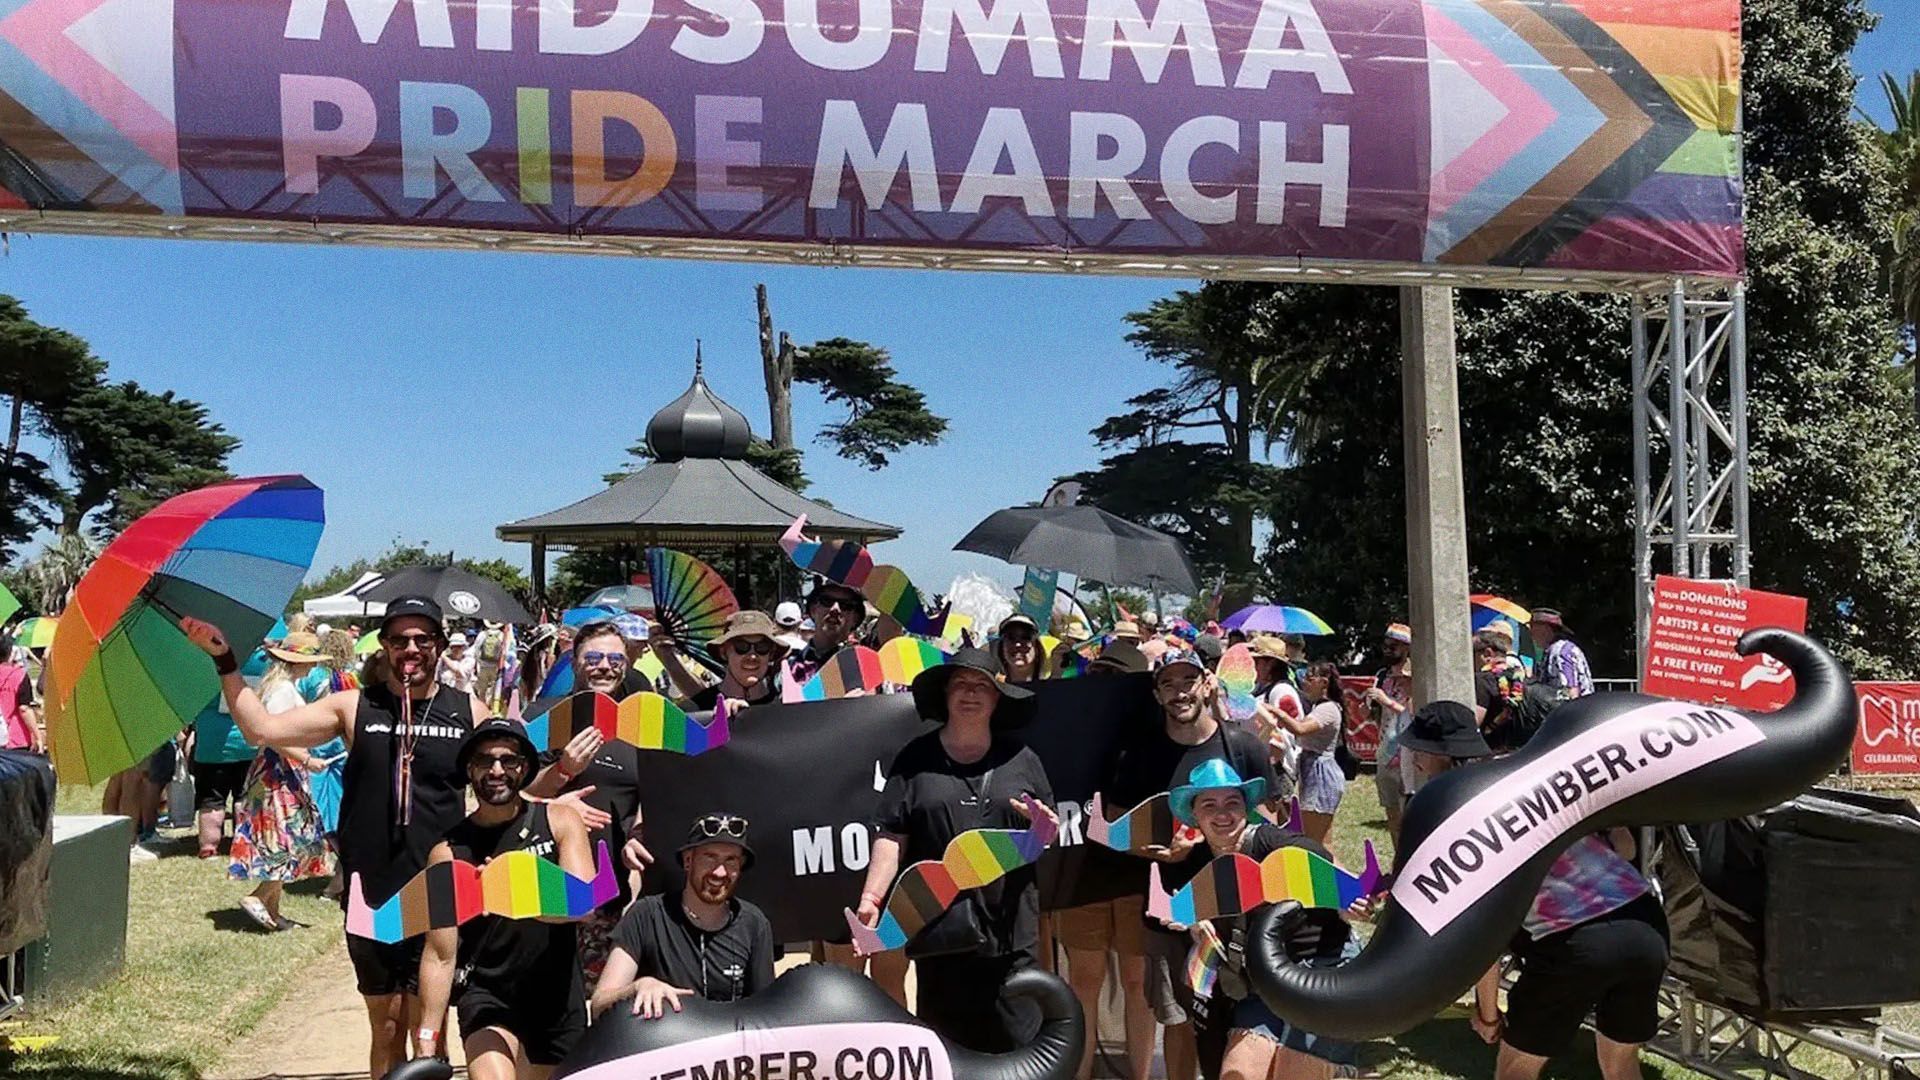 Movember employees posing with rainbow-coloured wooden moustaches at the Midsumma Pride March.